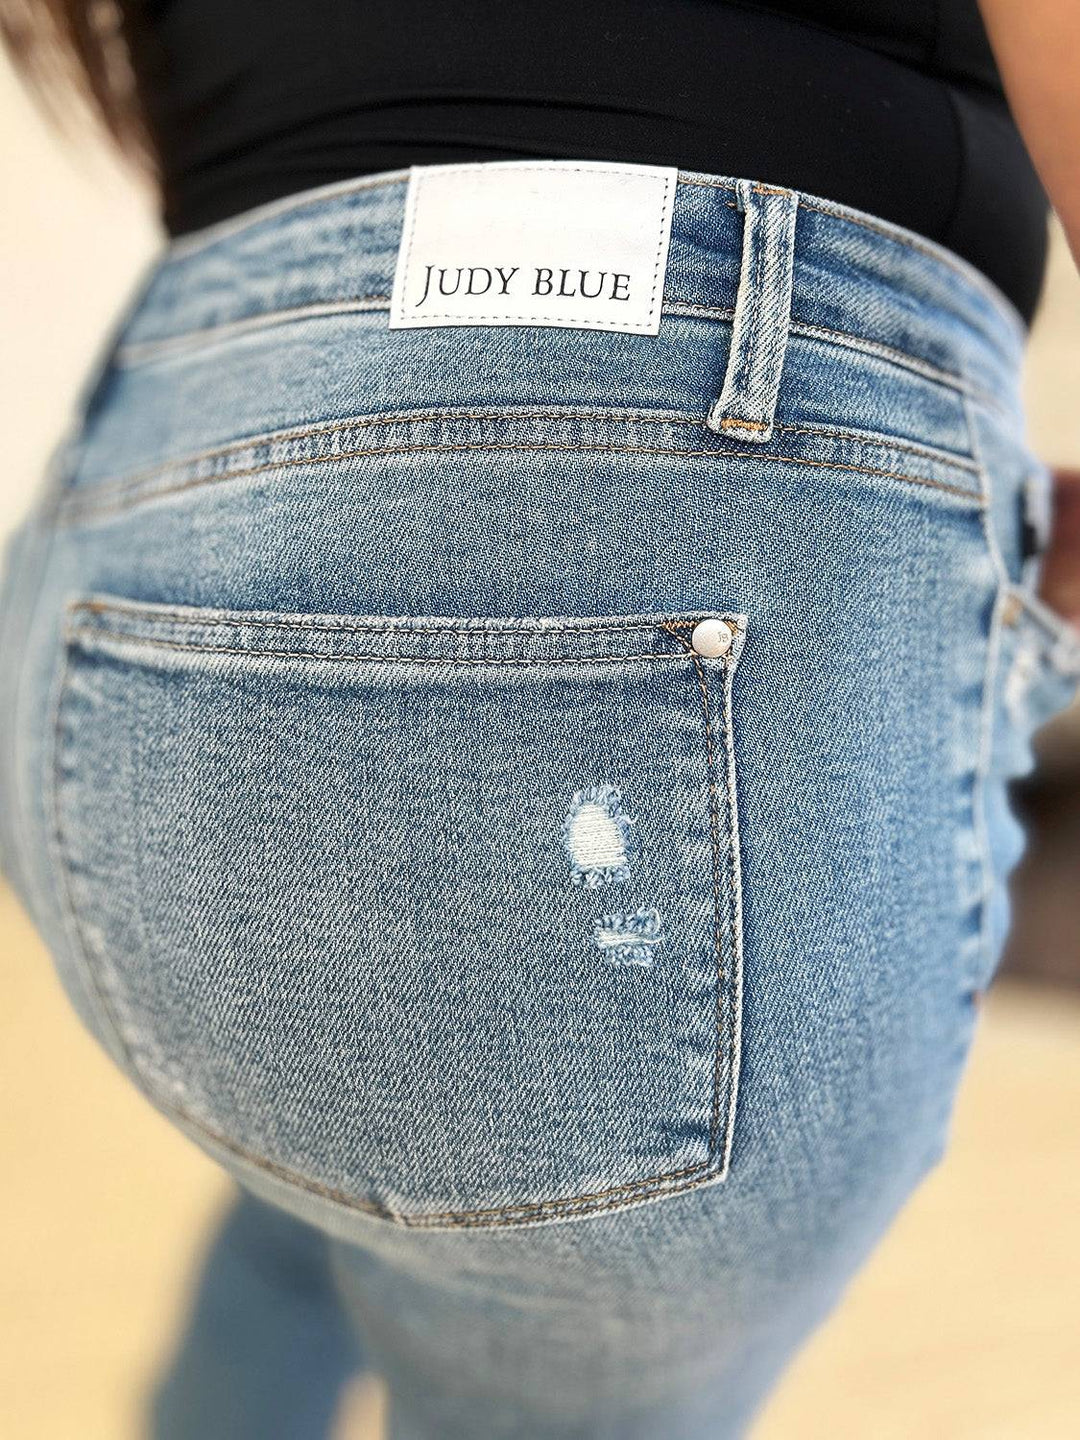 a close up of a person's butt with a label on it